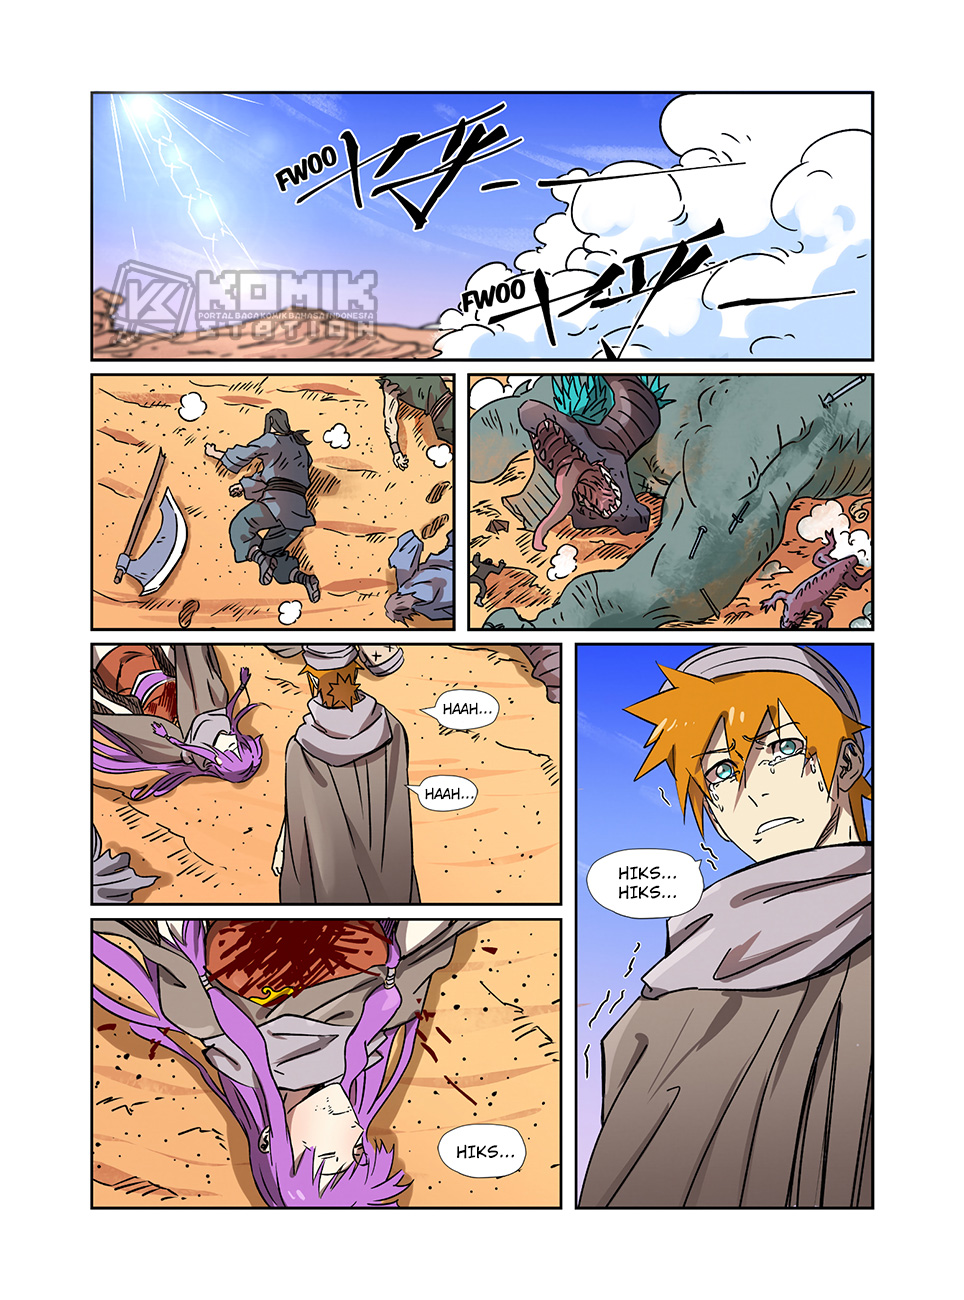 Tales of Demons and Gods Chapter 288